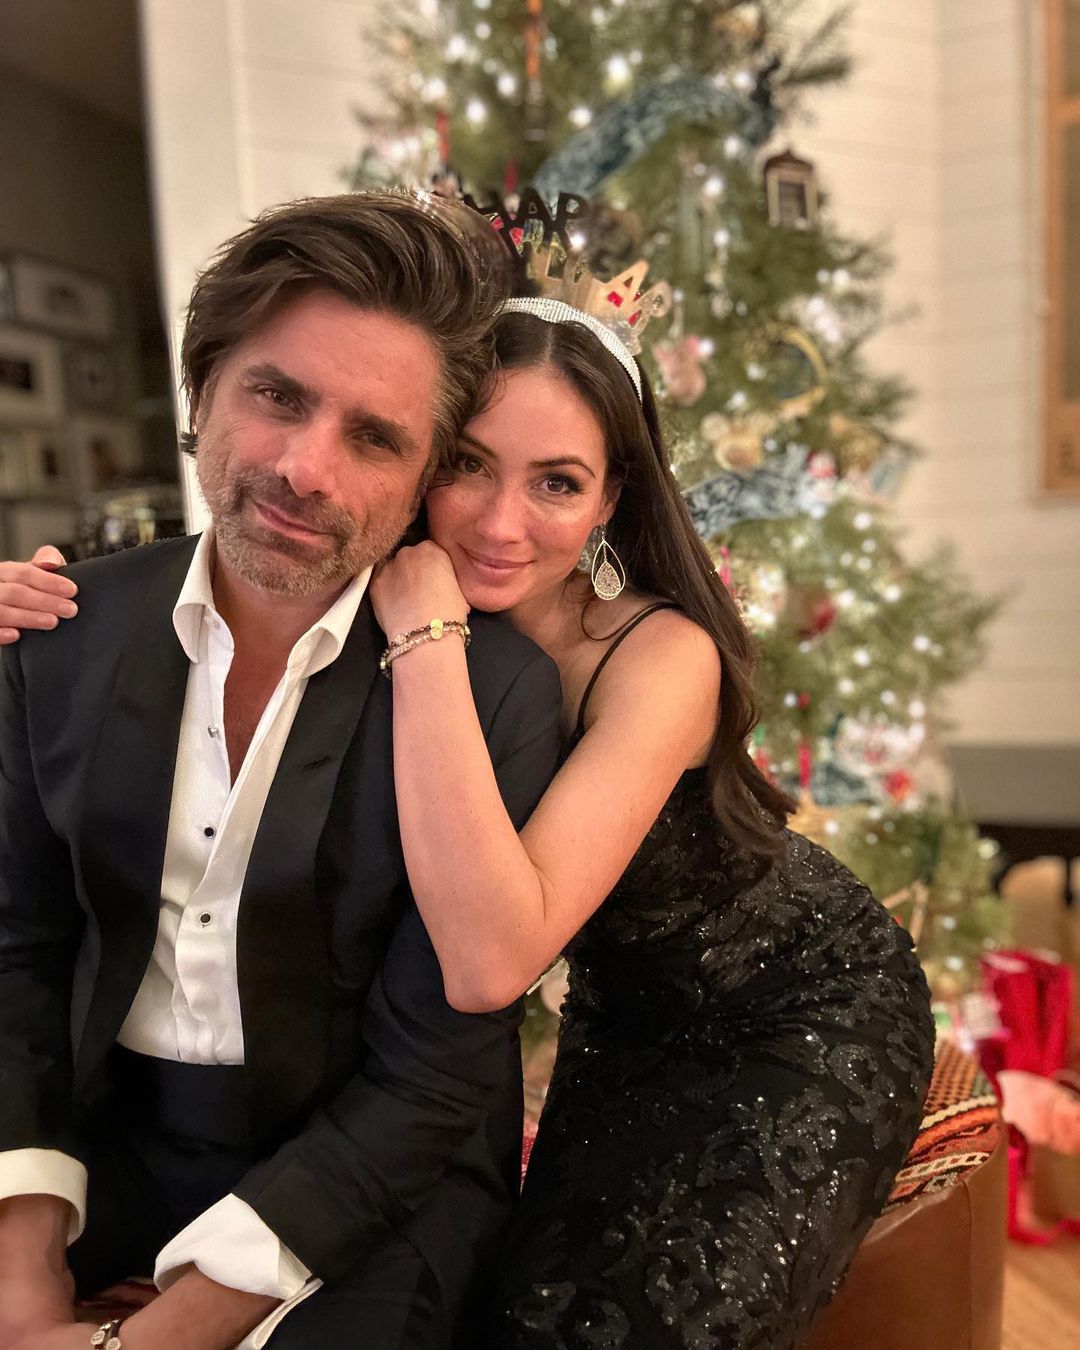 Caitlin McHugh wished her followers on Instagram A Happy New Year by sharing pictures with he husband John Stamos